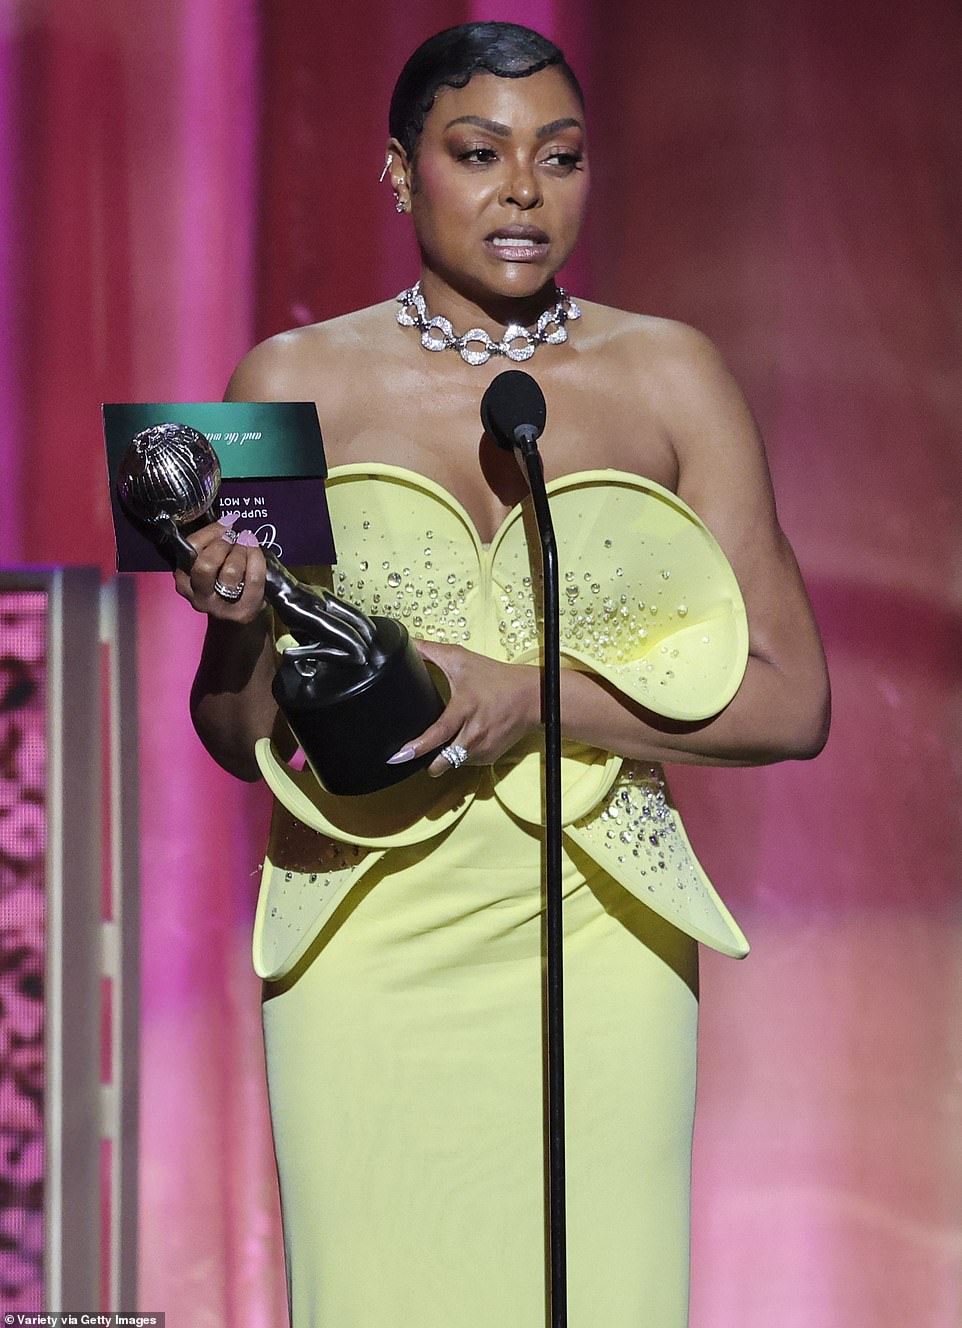 Taraji P. Henson, 53, won the first award for Best Supporting Actress for her role in The Color Purple as Shug Avery